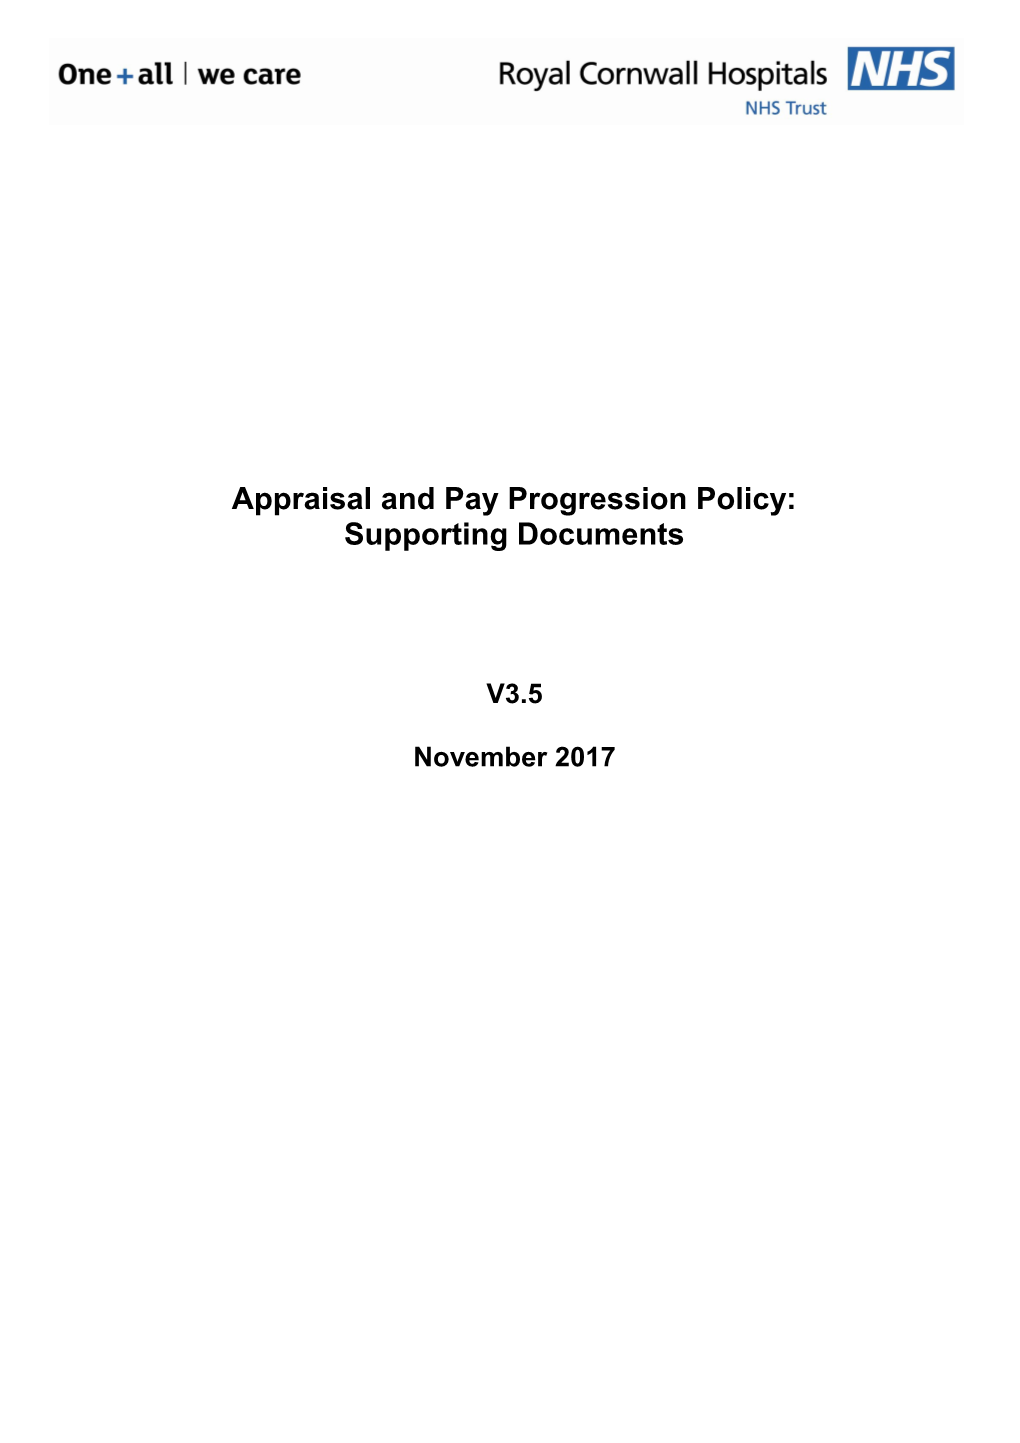 Appraisal and Pay Progression Policy